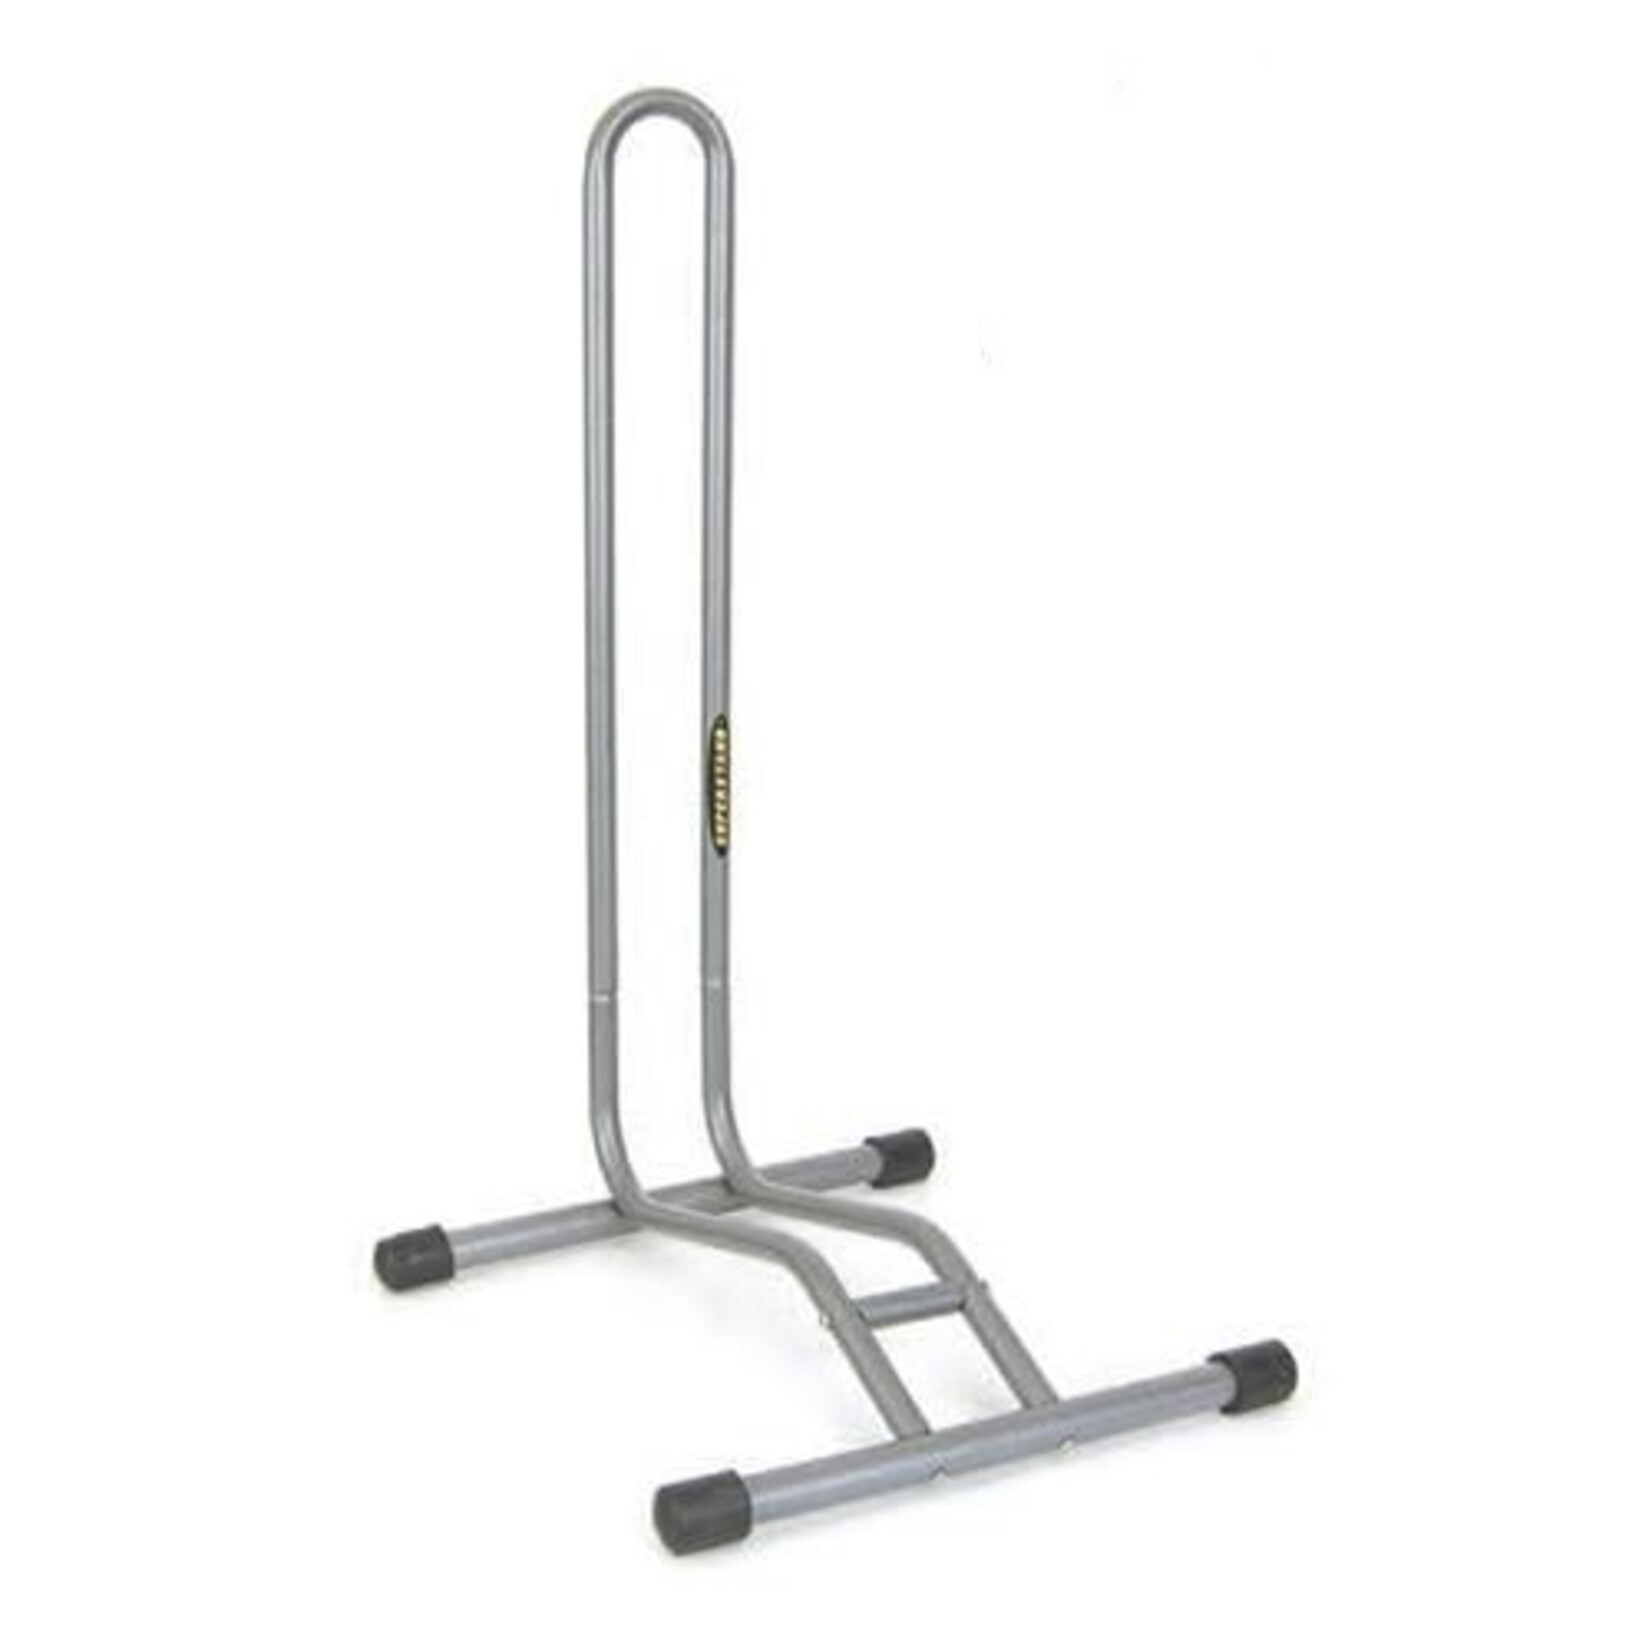 Superstand Superstand Single Bike Storage Stand - Suits All 20”BMX,Racing,Mountain & Hybrid